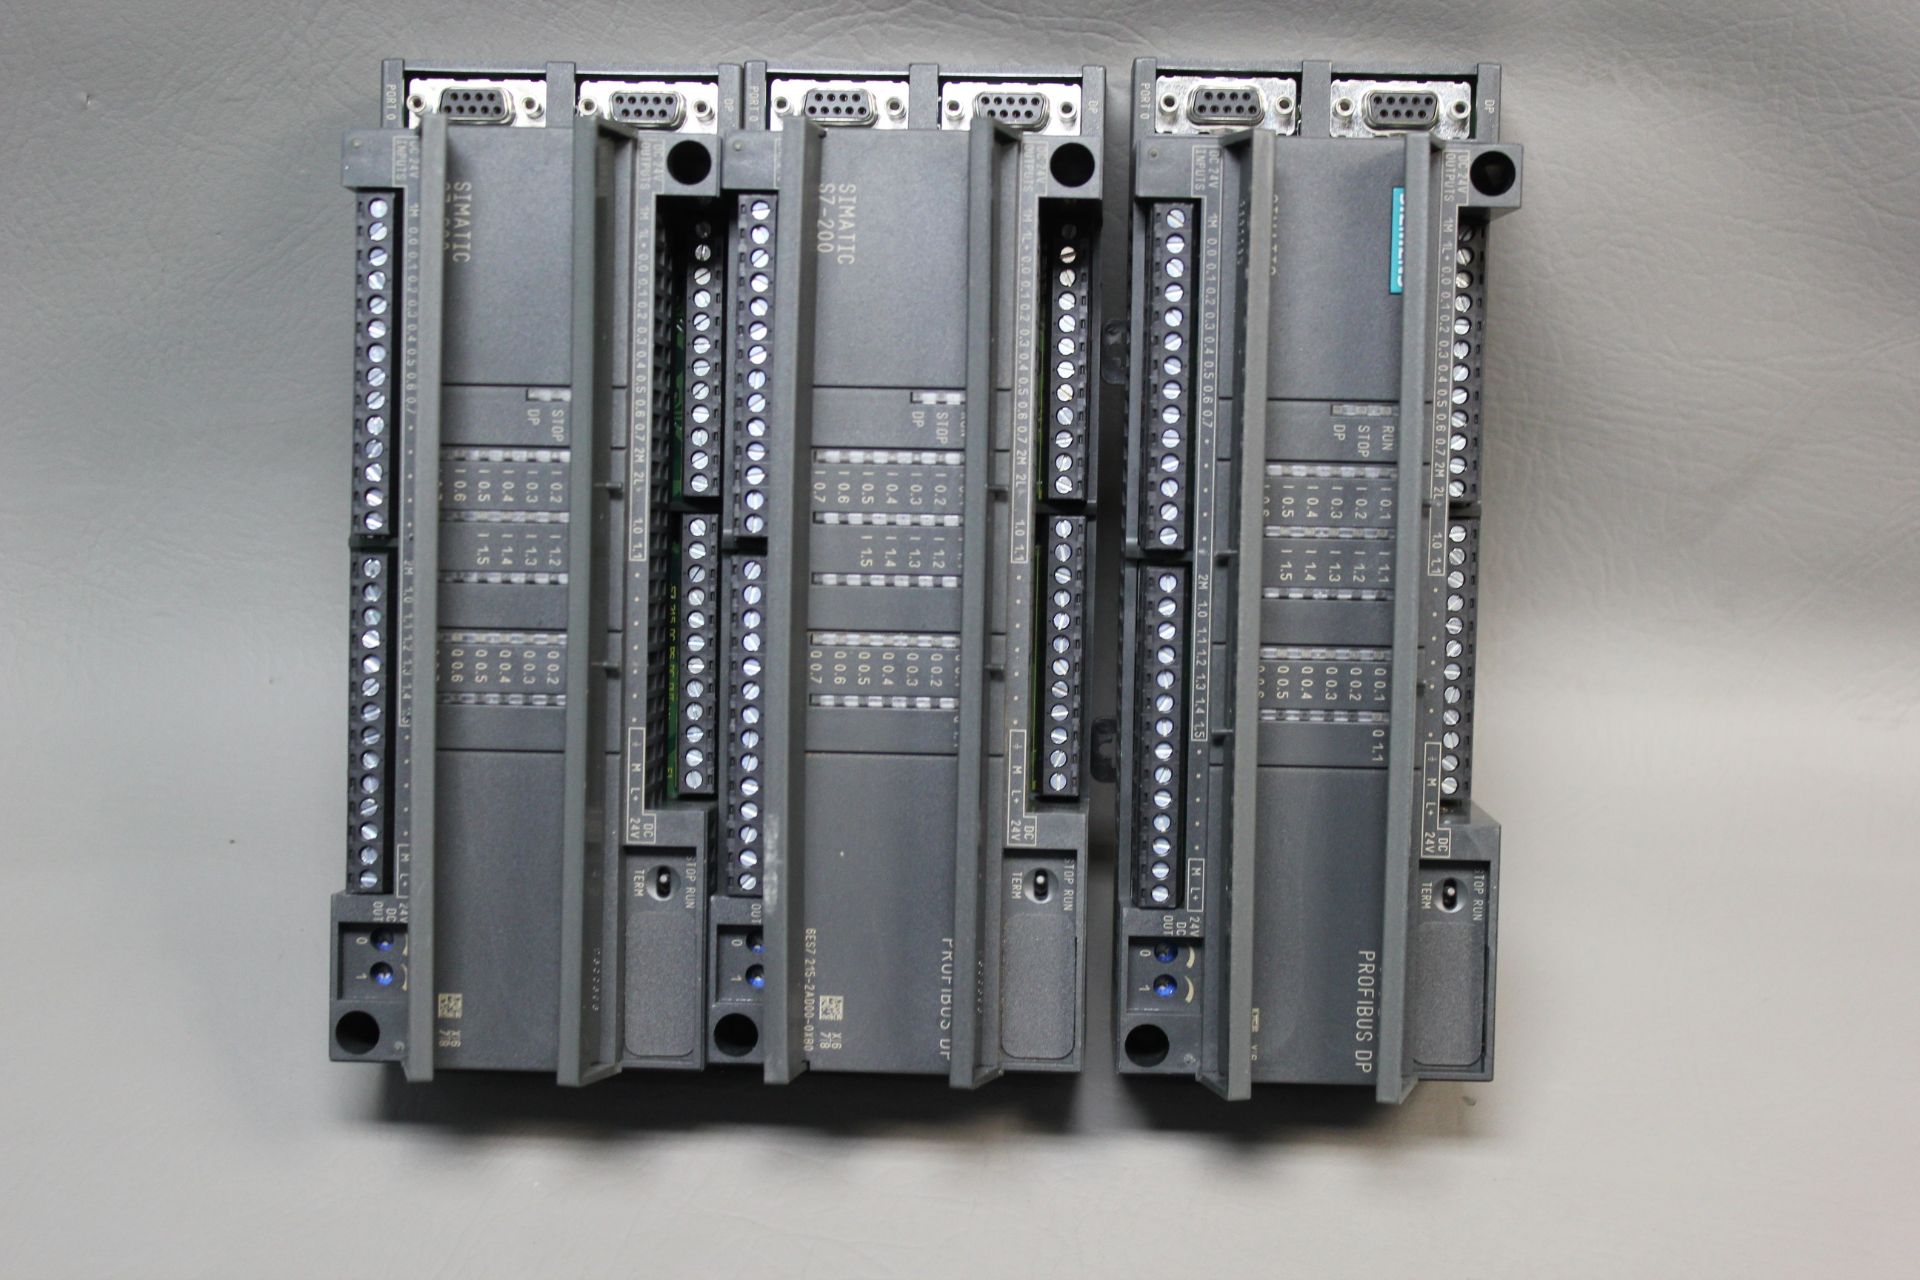 LOT OF SIEMENS SIMATIC S7-200 PLC CPU MODULES - Image 3 of 4